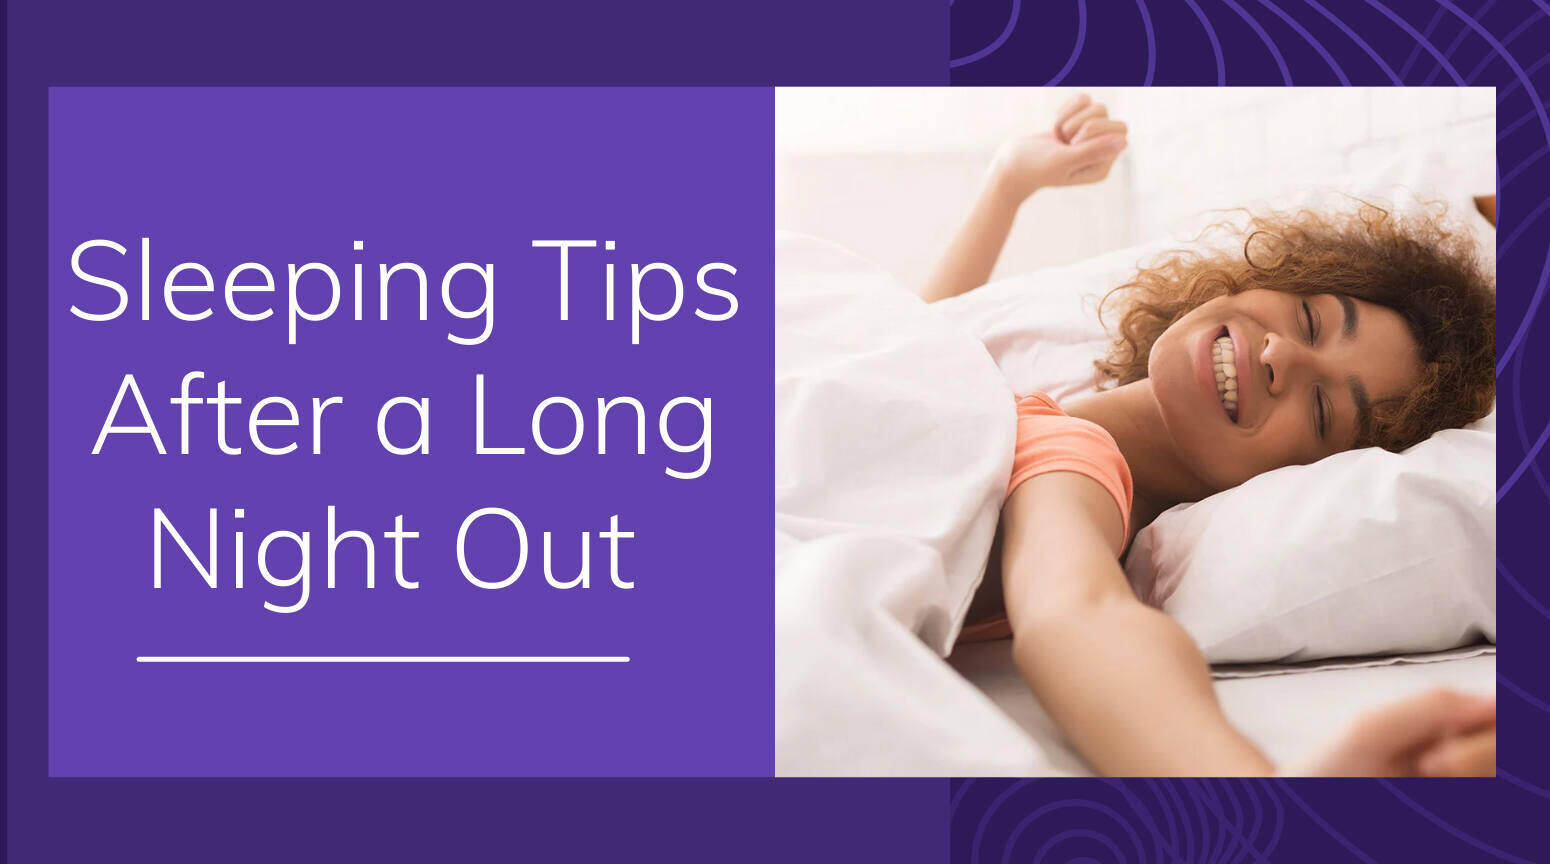 Sleeping Tips After a Long Night Out